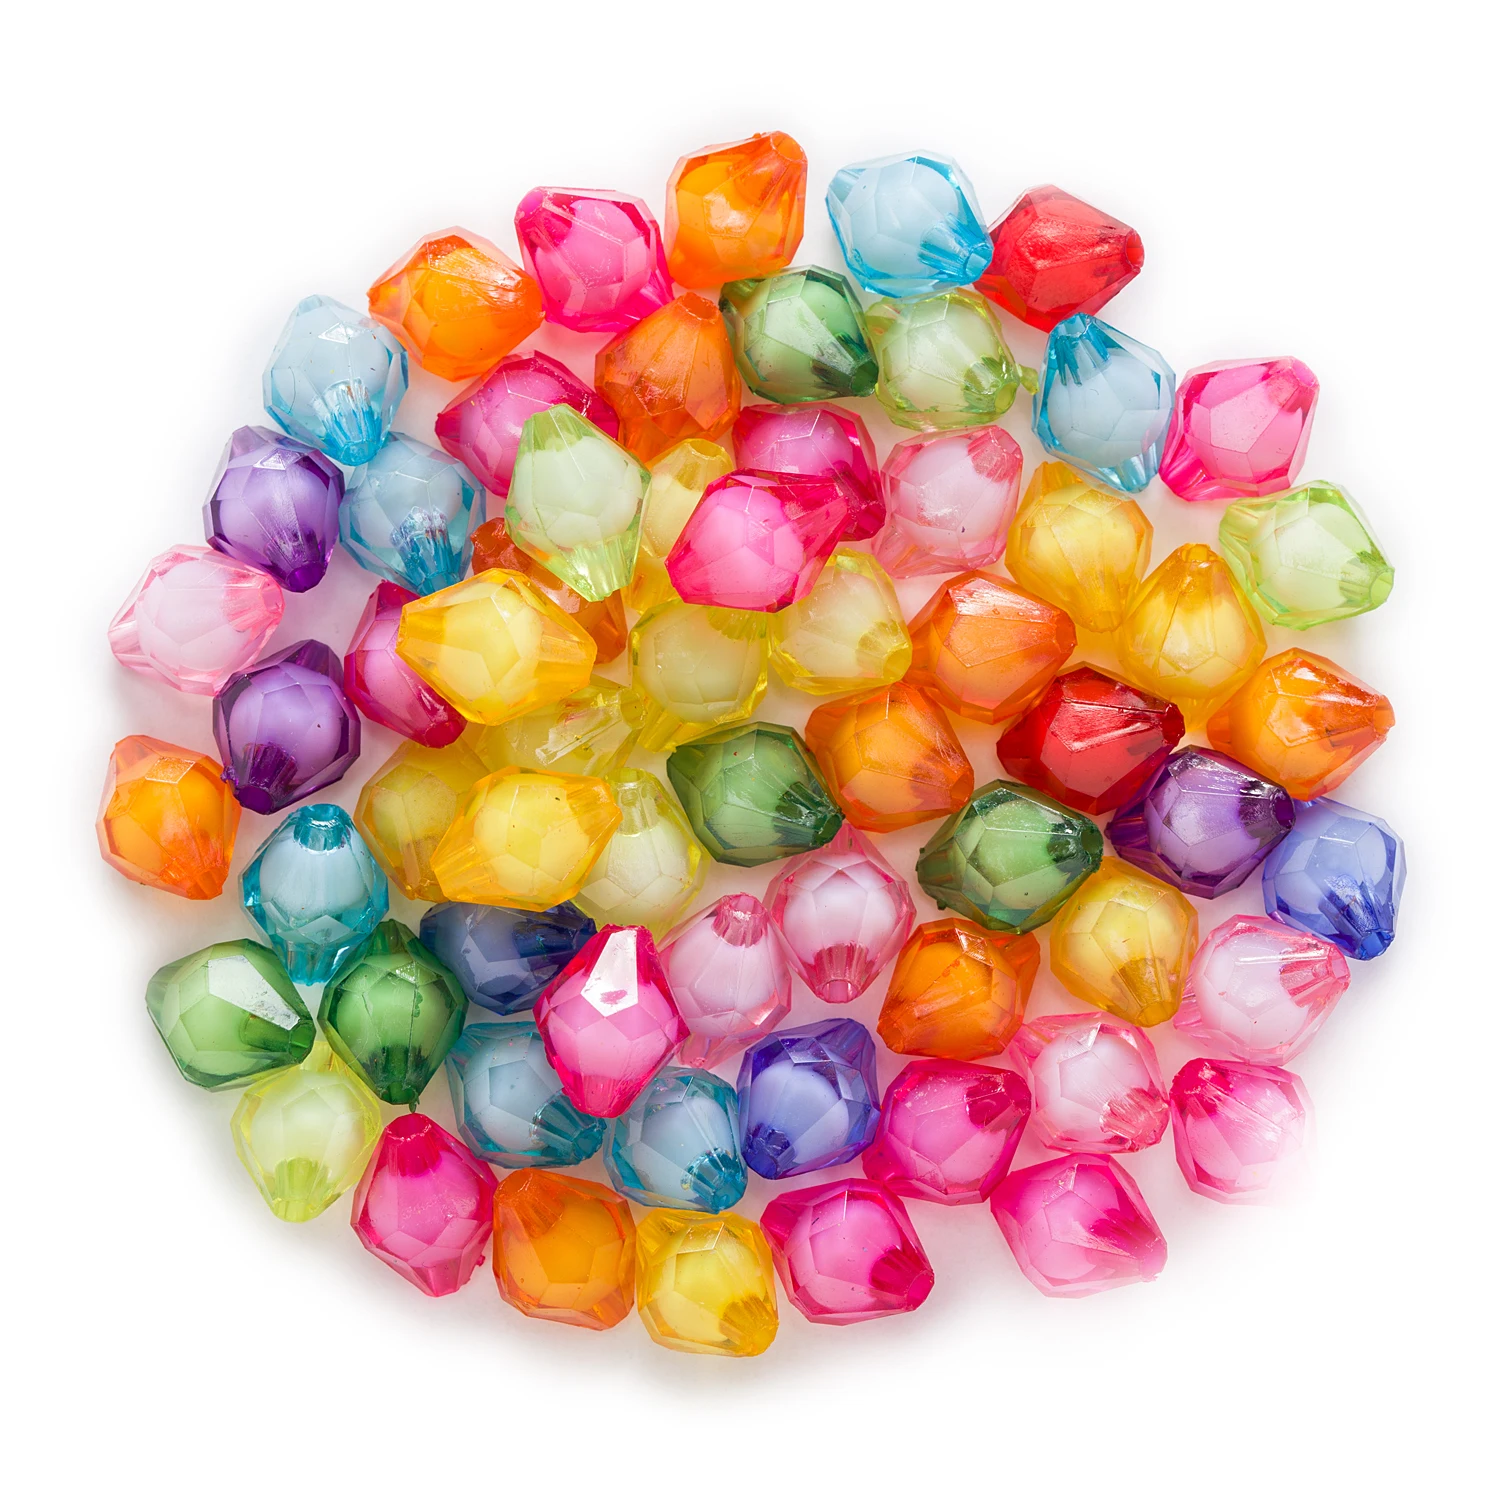 

Random Mixed Acrylic Bicone Shaped Faceted Findings Jewelry Making Women Children DIY Bracelet Necklace Spacer Beads 14-20mm